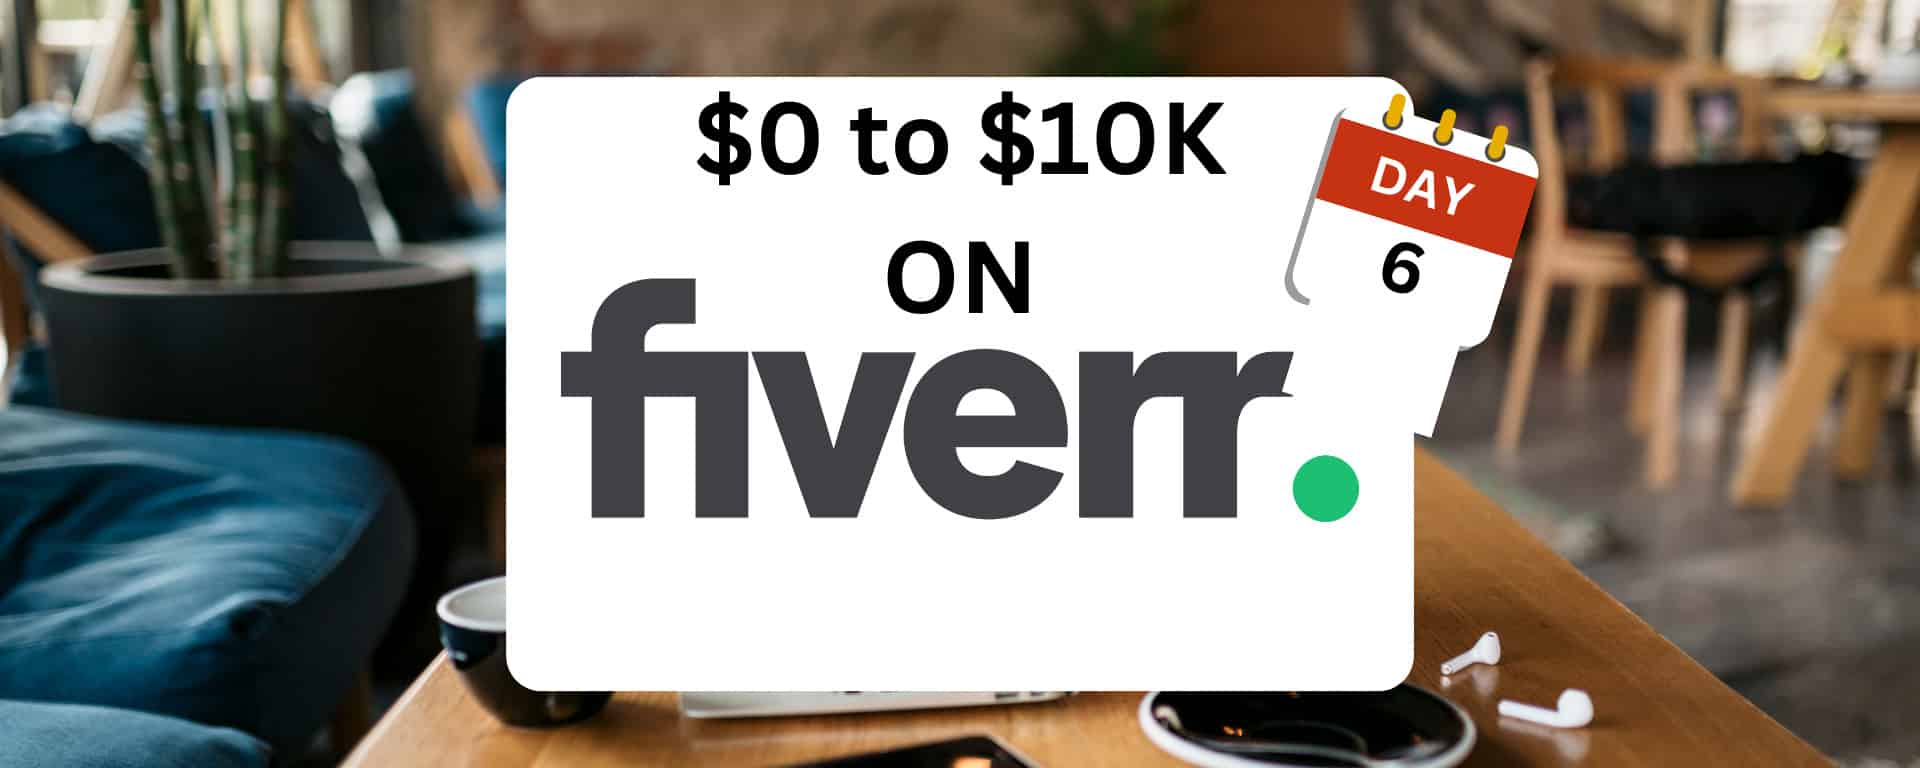 $0 to $10K on Fiverr - Day 6